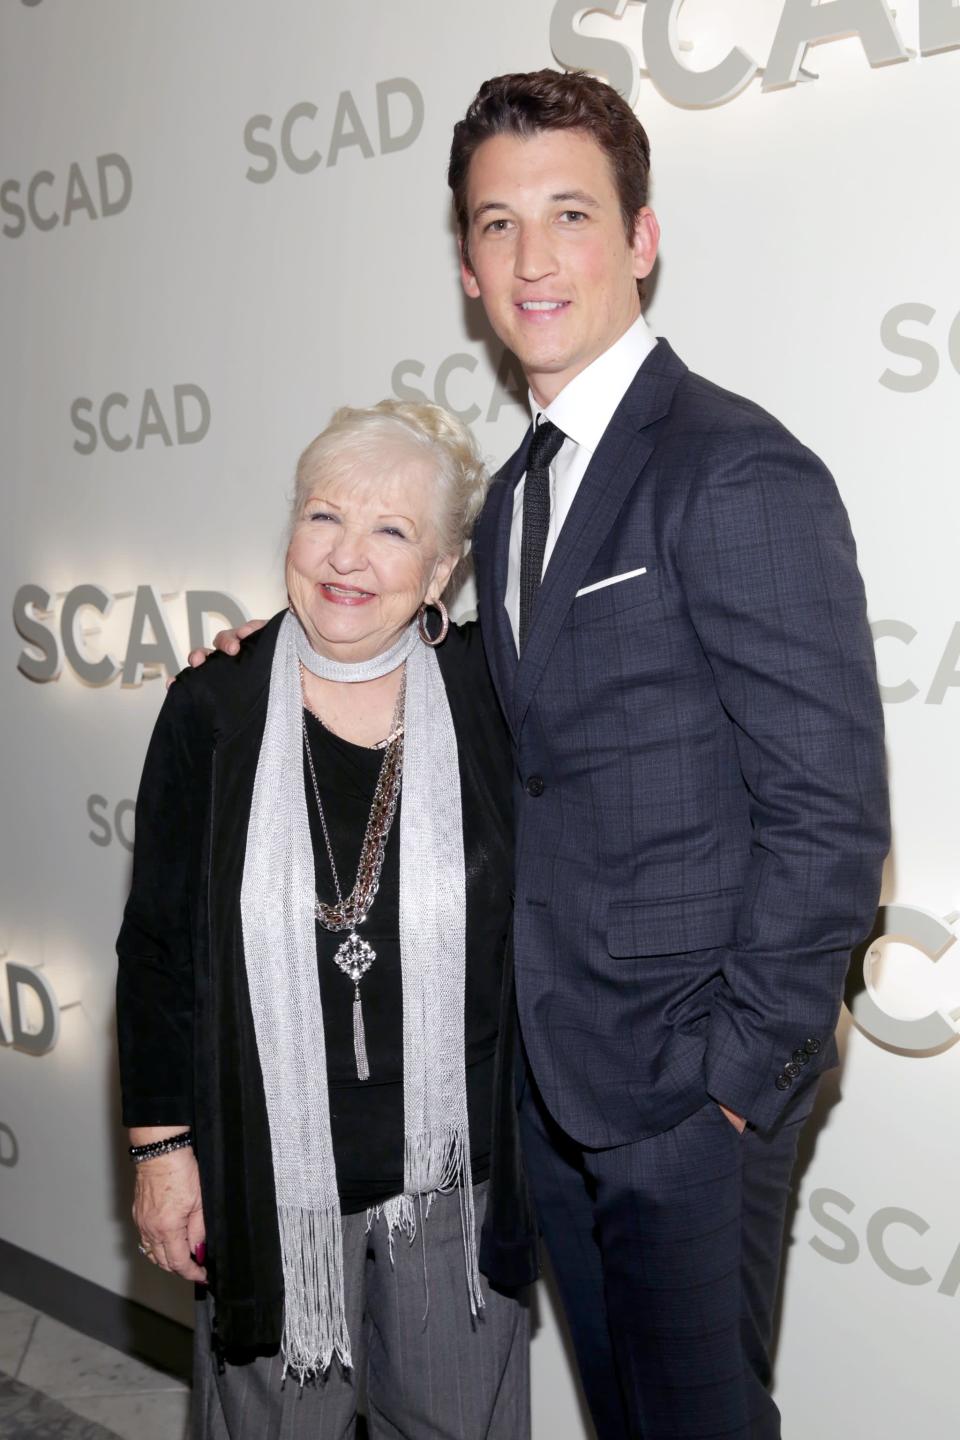 SAVANNAH, GA - OCTOBER 25:  Leona Flowers and Miles Teller attend the Miles Teller Vanguard Award Presentation during the 19th Annual Savannah Film Festival presented by SCAD on October 25, 2016 in Savannah, Georgia.  (Photo by Cindy Ord/Getty Images for SCAD)